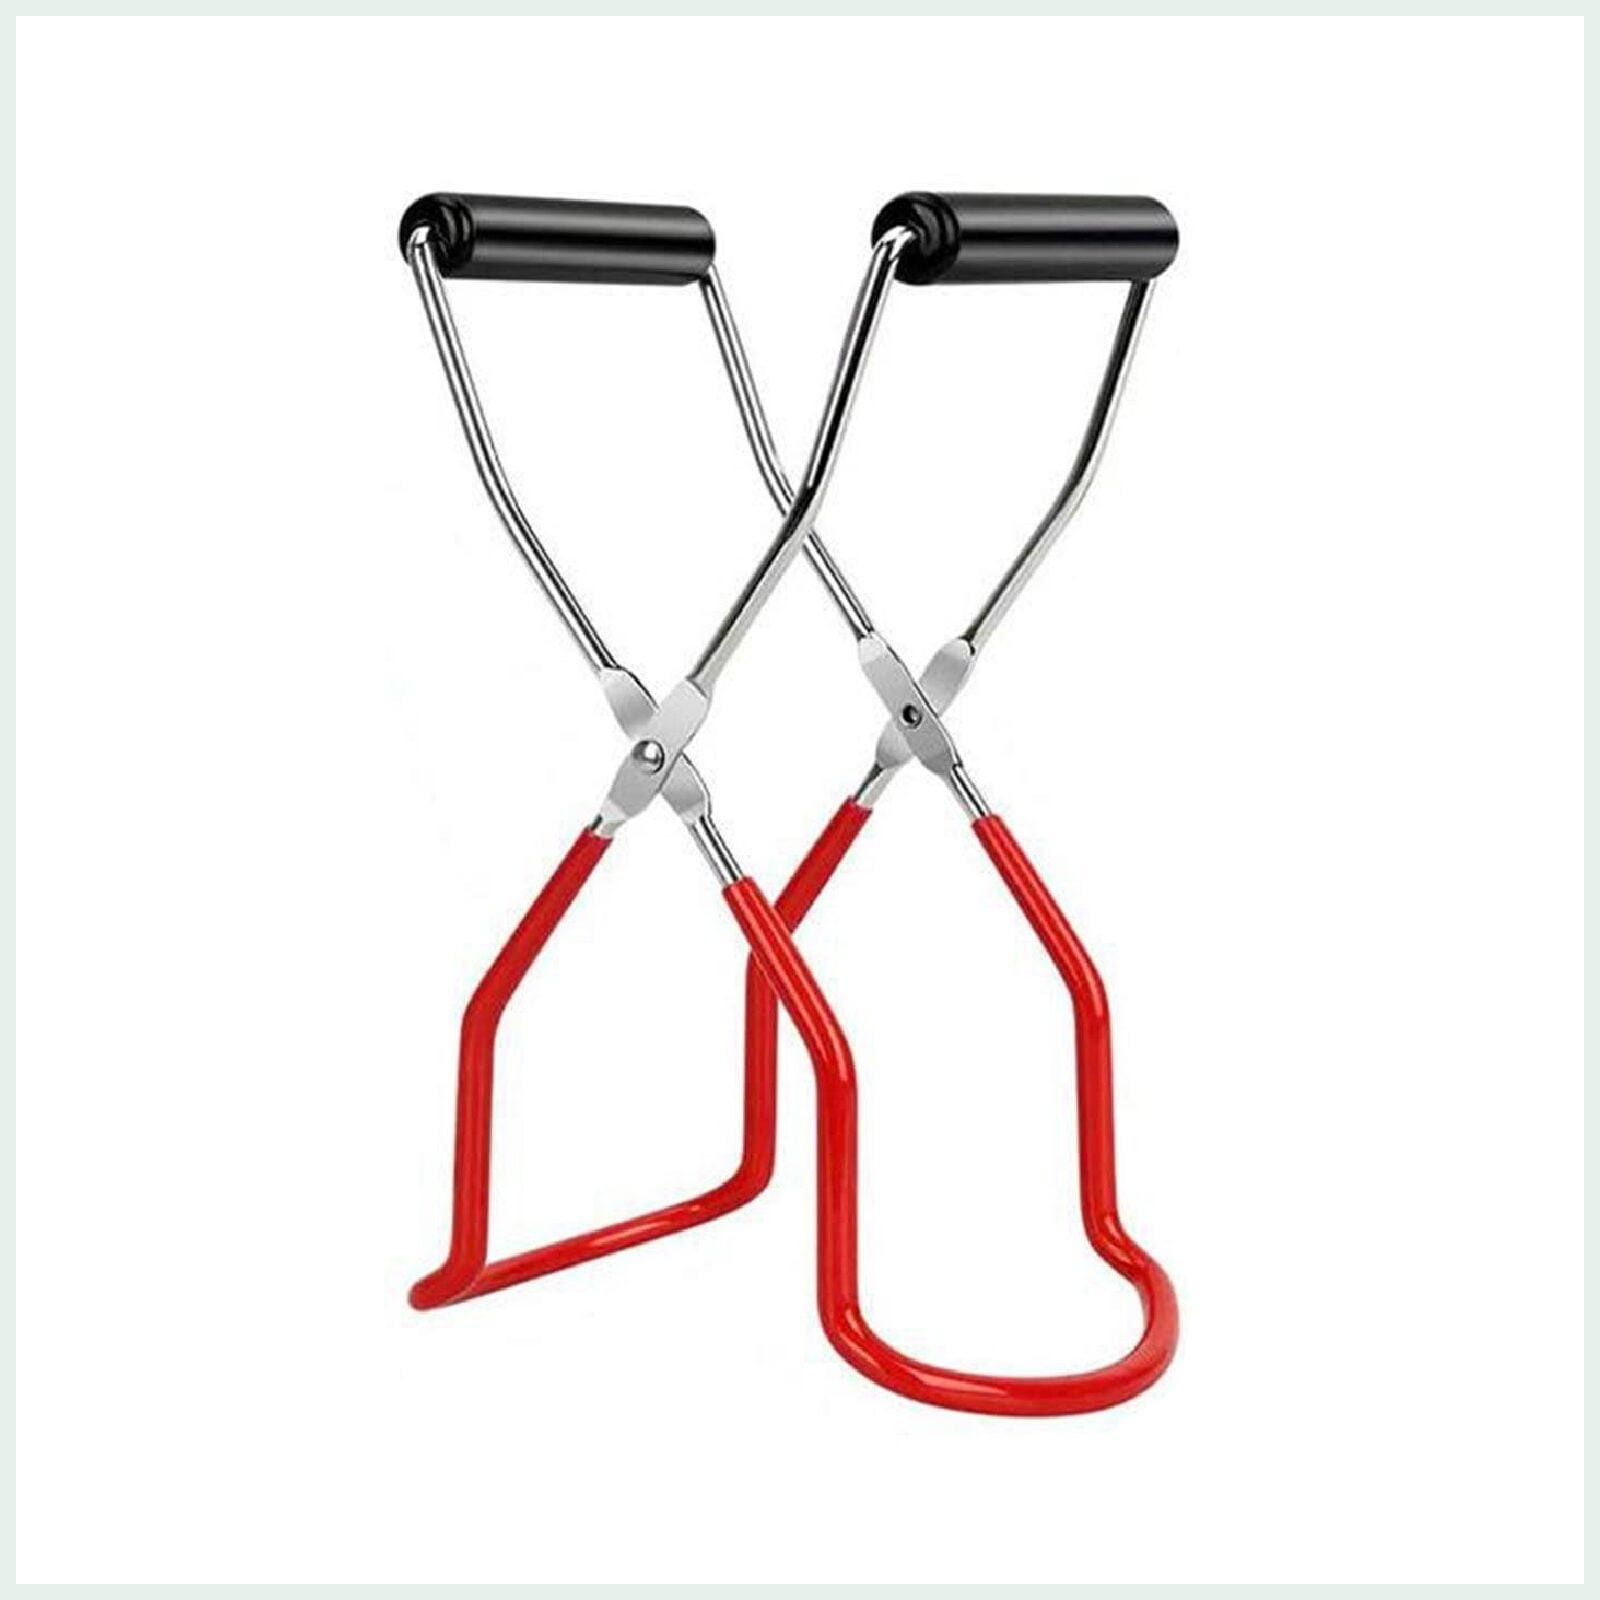 Canning tongs